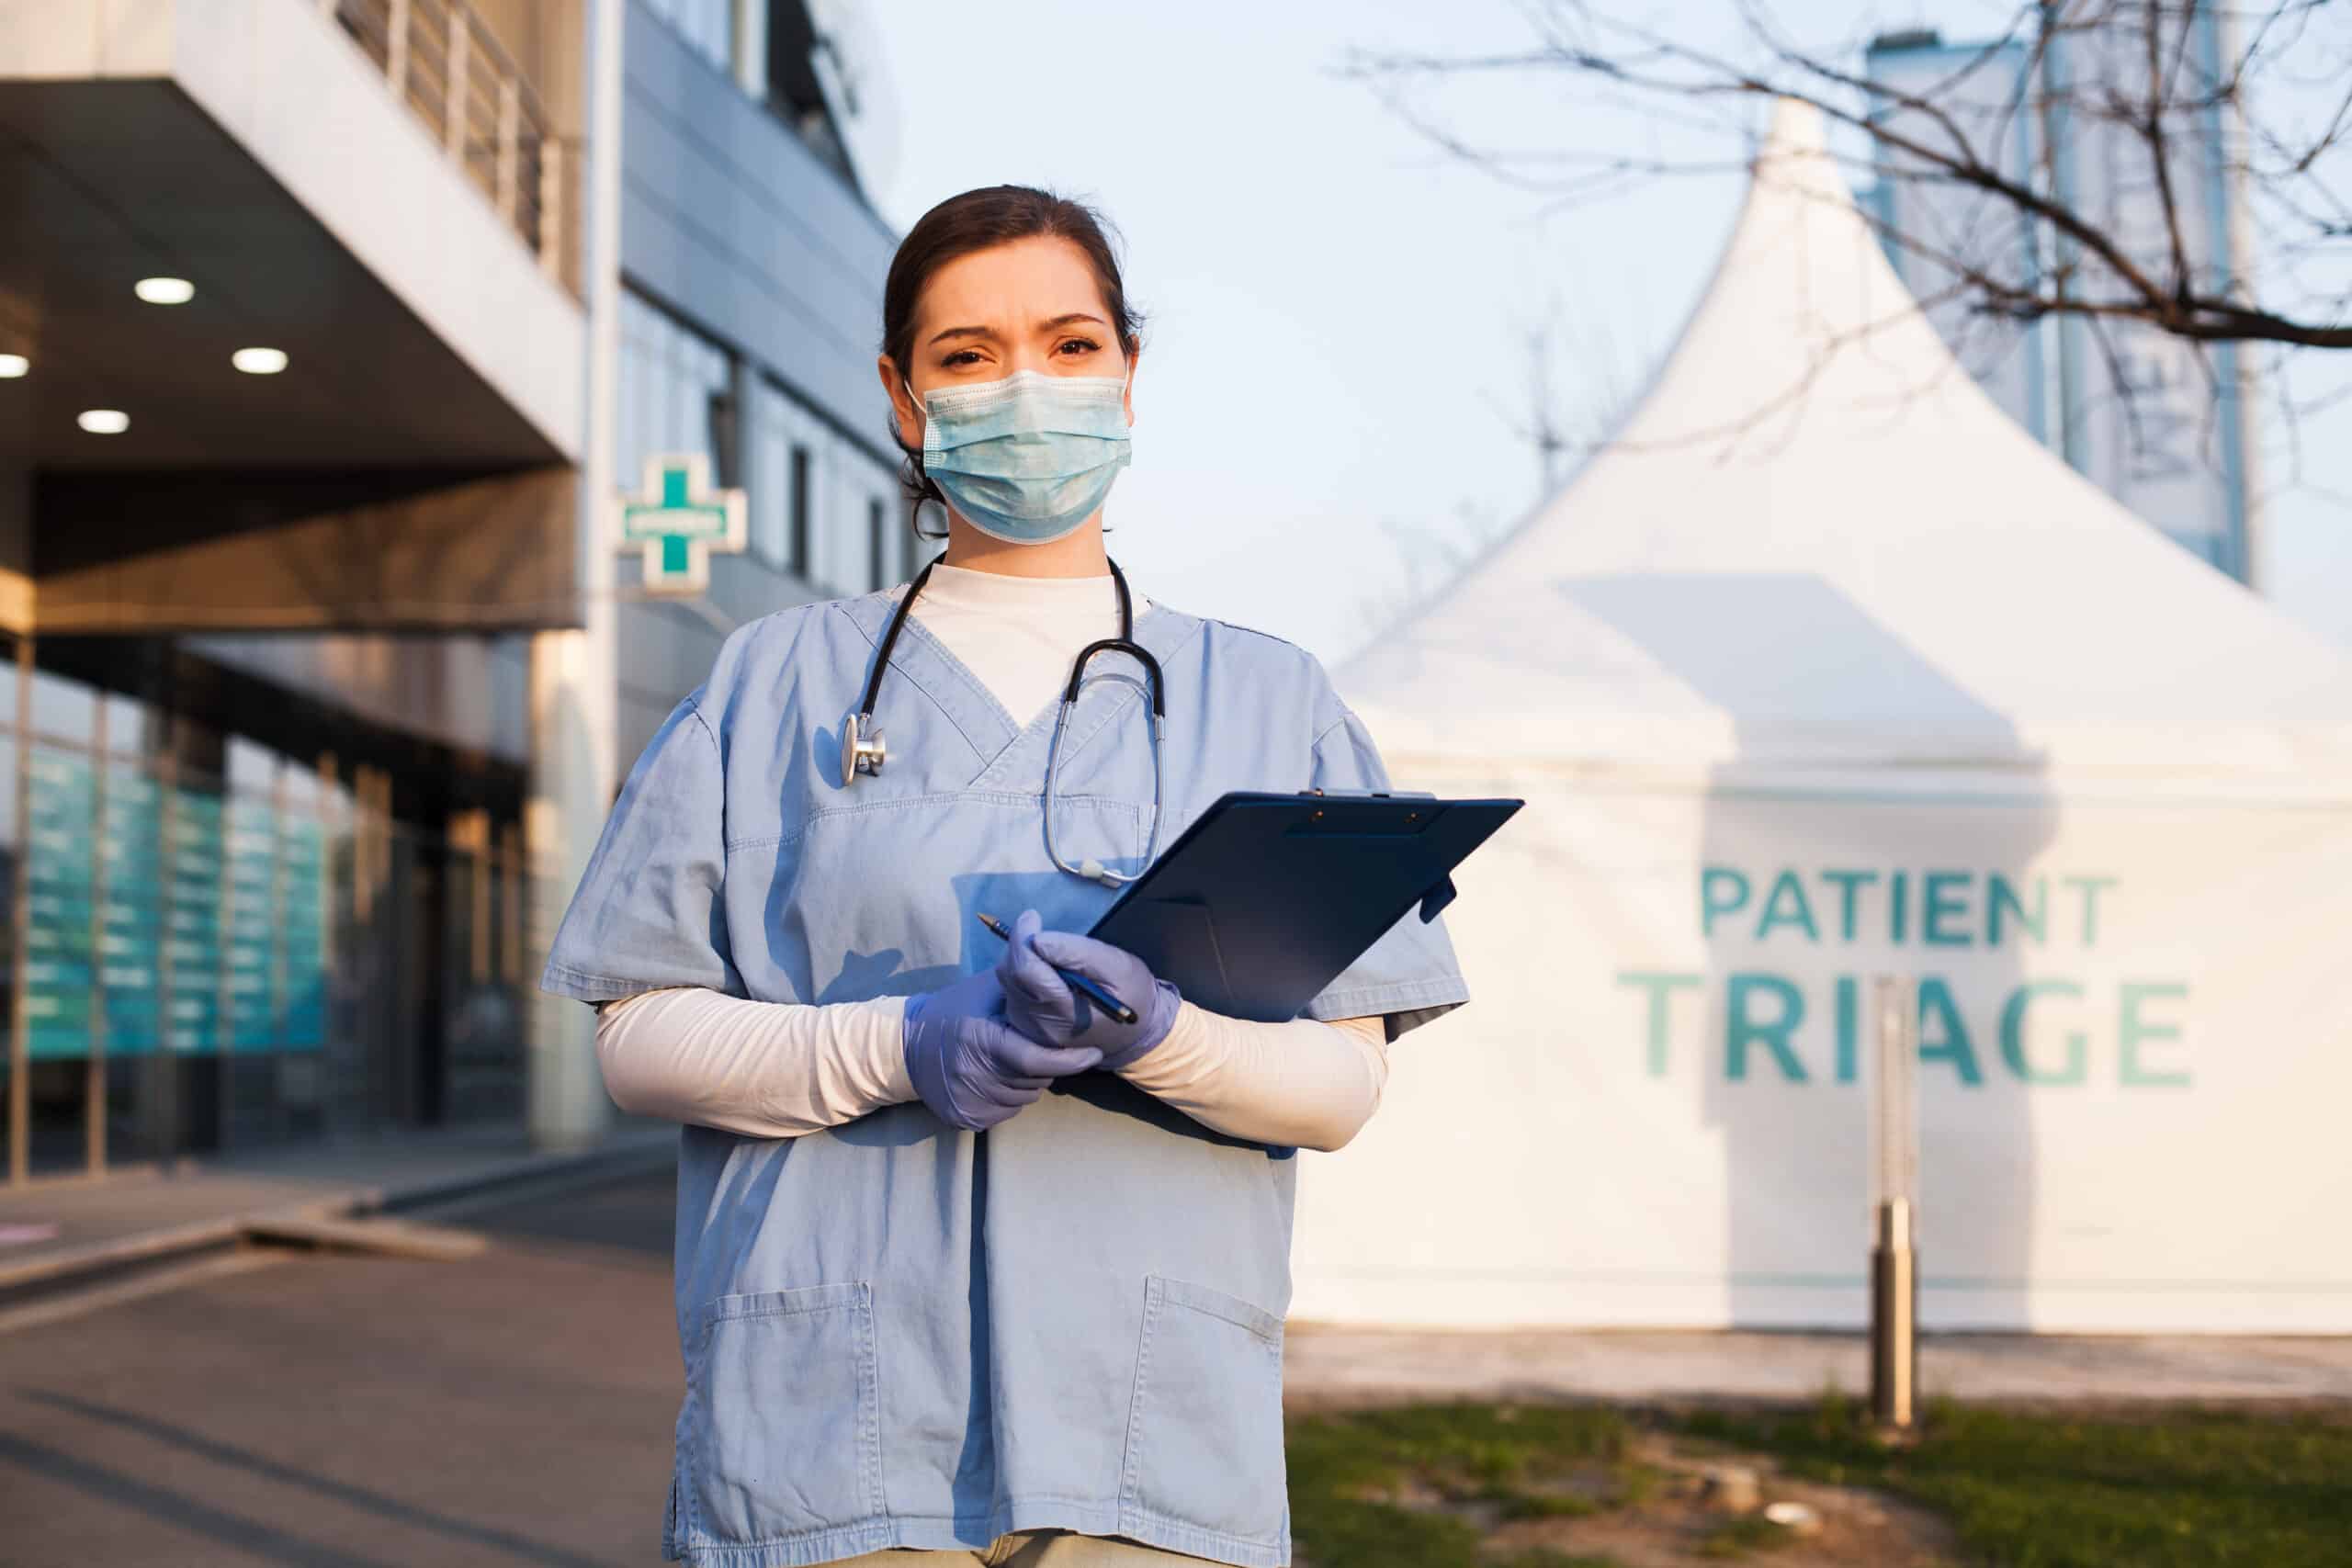 A female medical professional standing infront of a hospital